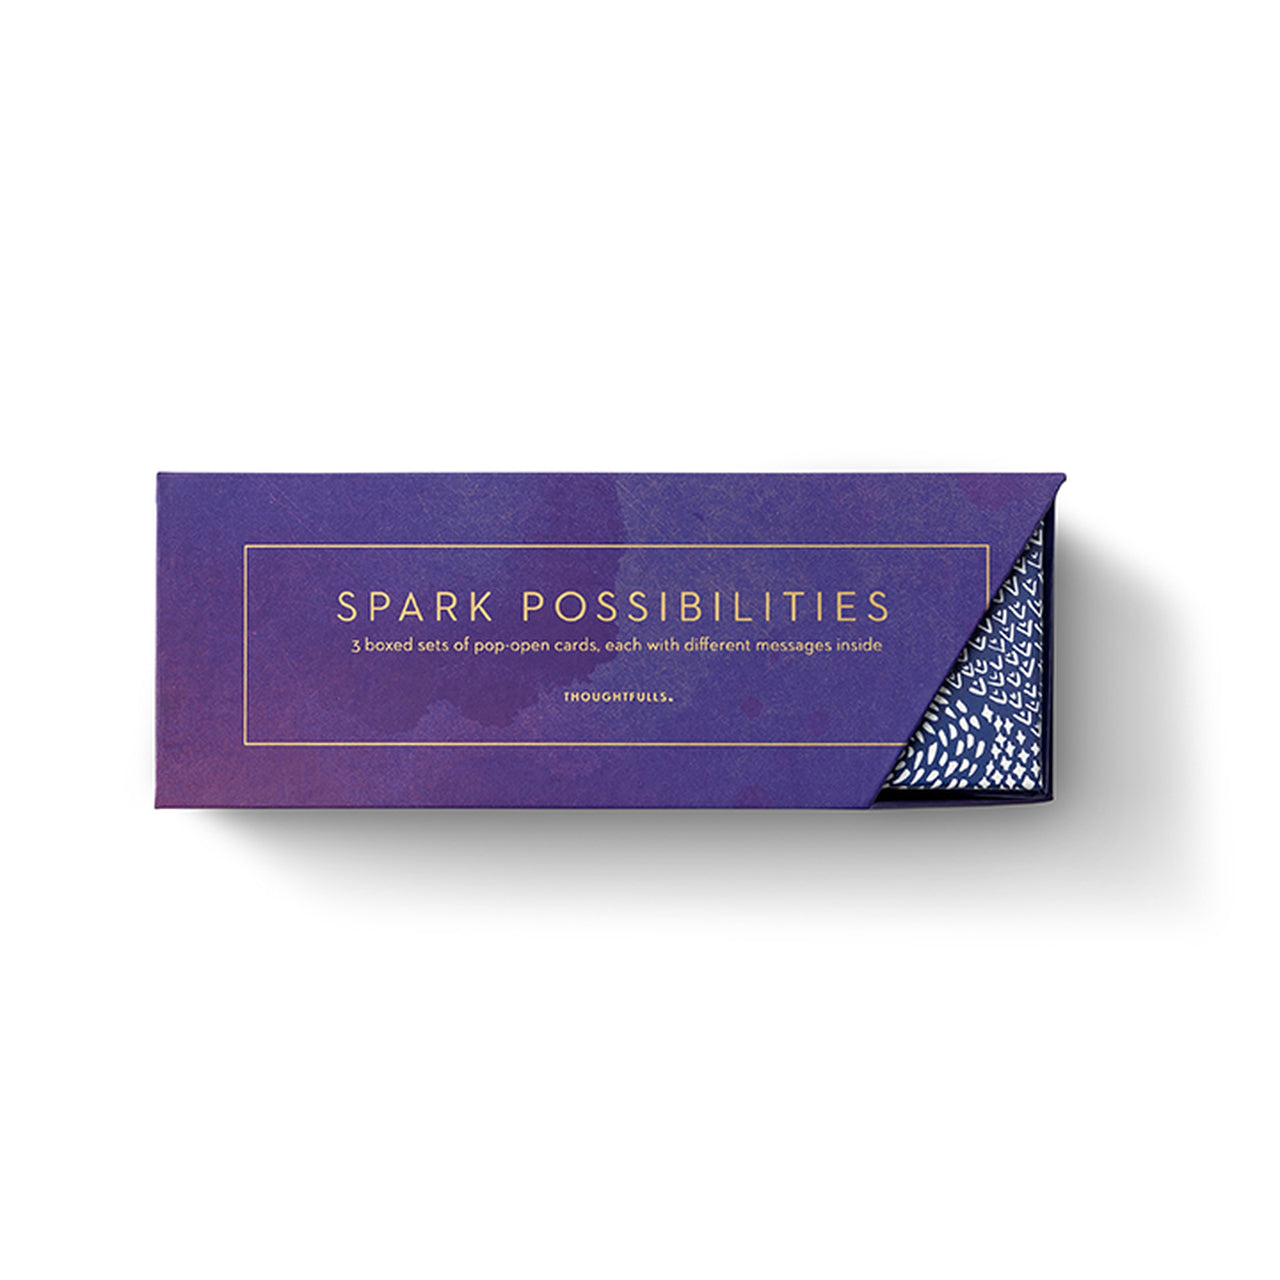 Compendium Thoughtfulls Boxed Collection  - Spark Possibilities